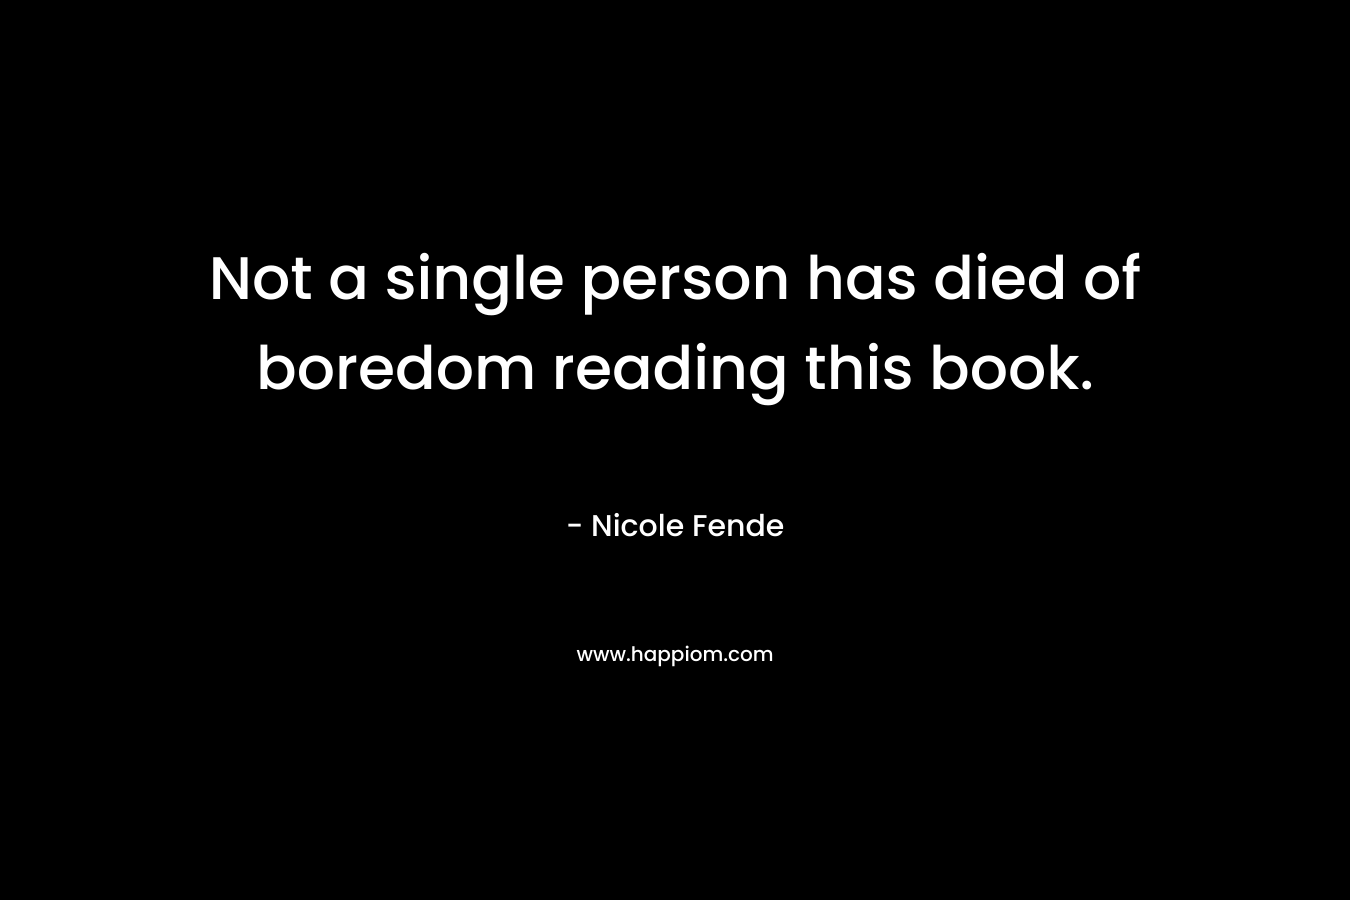 Not a single person has died of boredom reading this book. – Nicole Fende